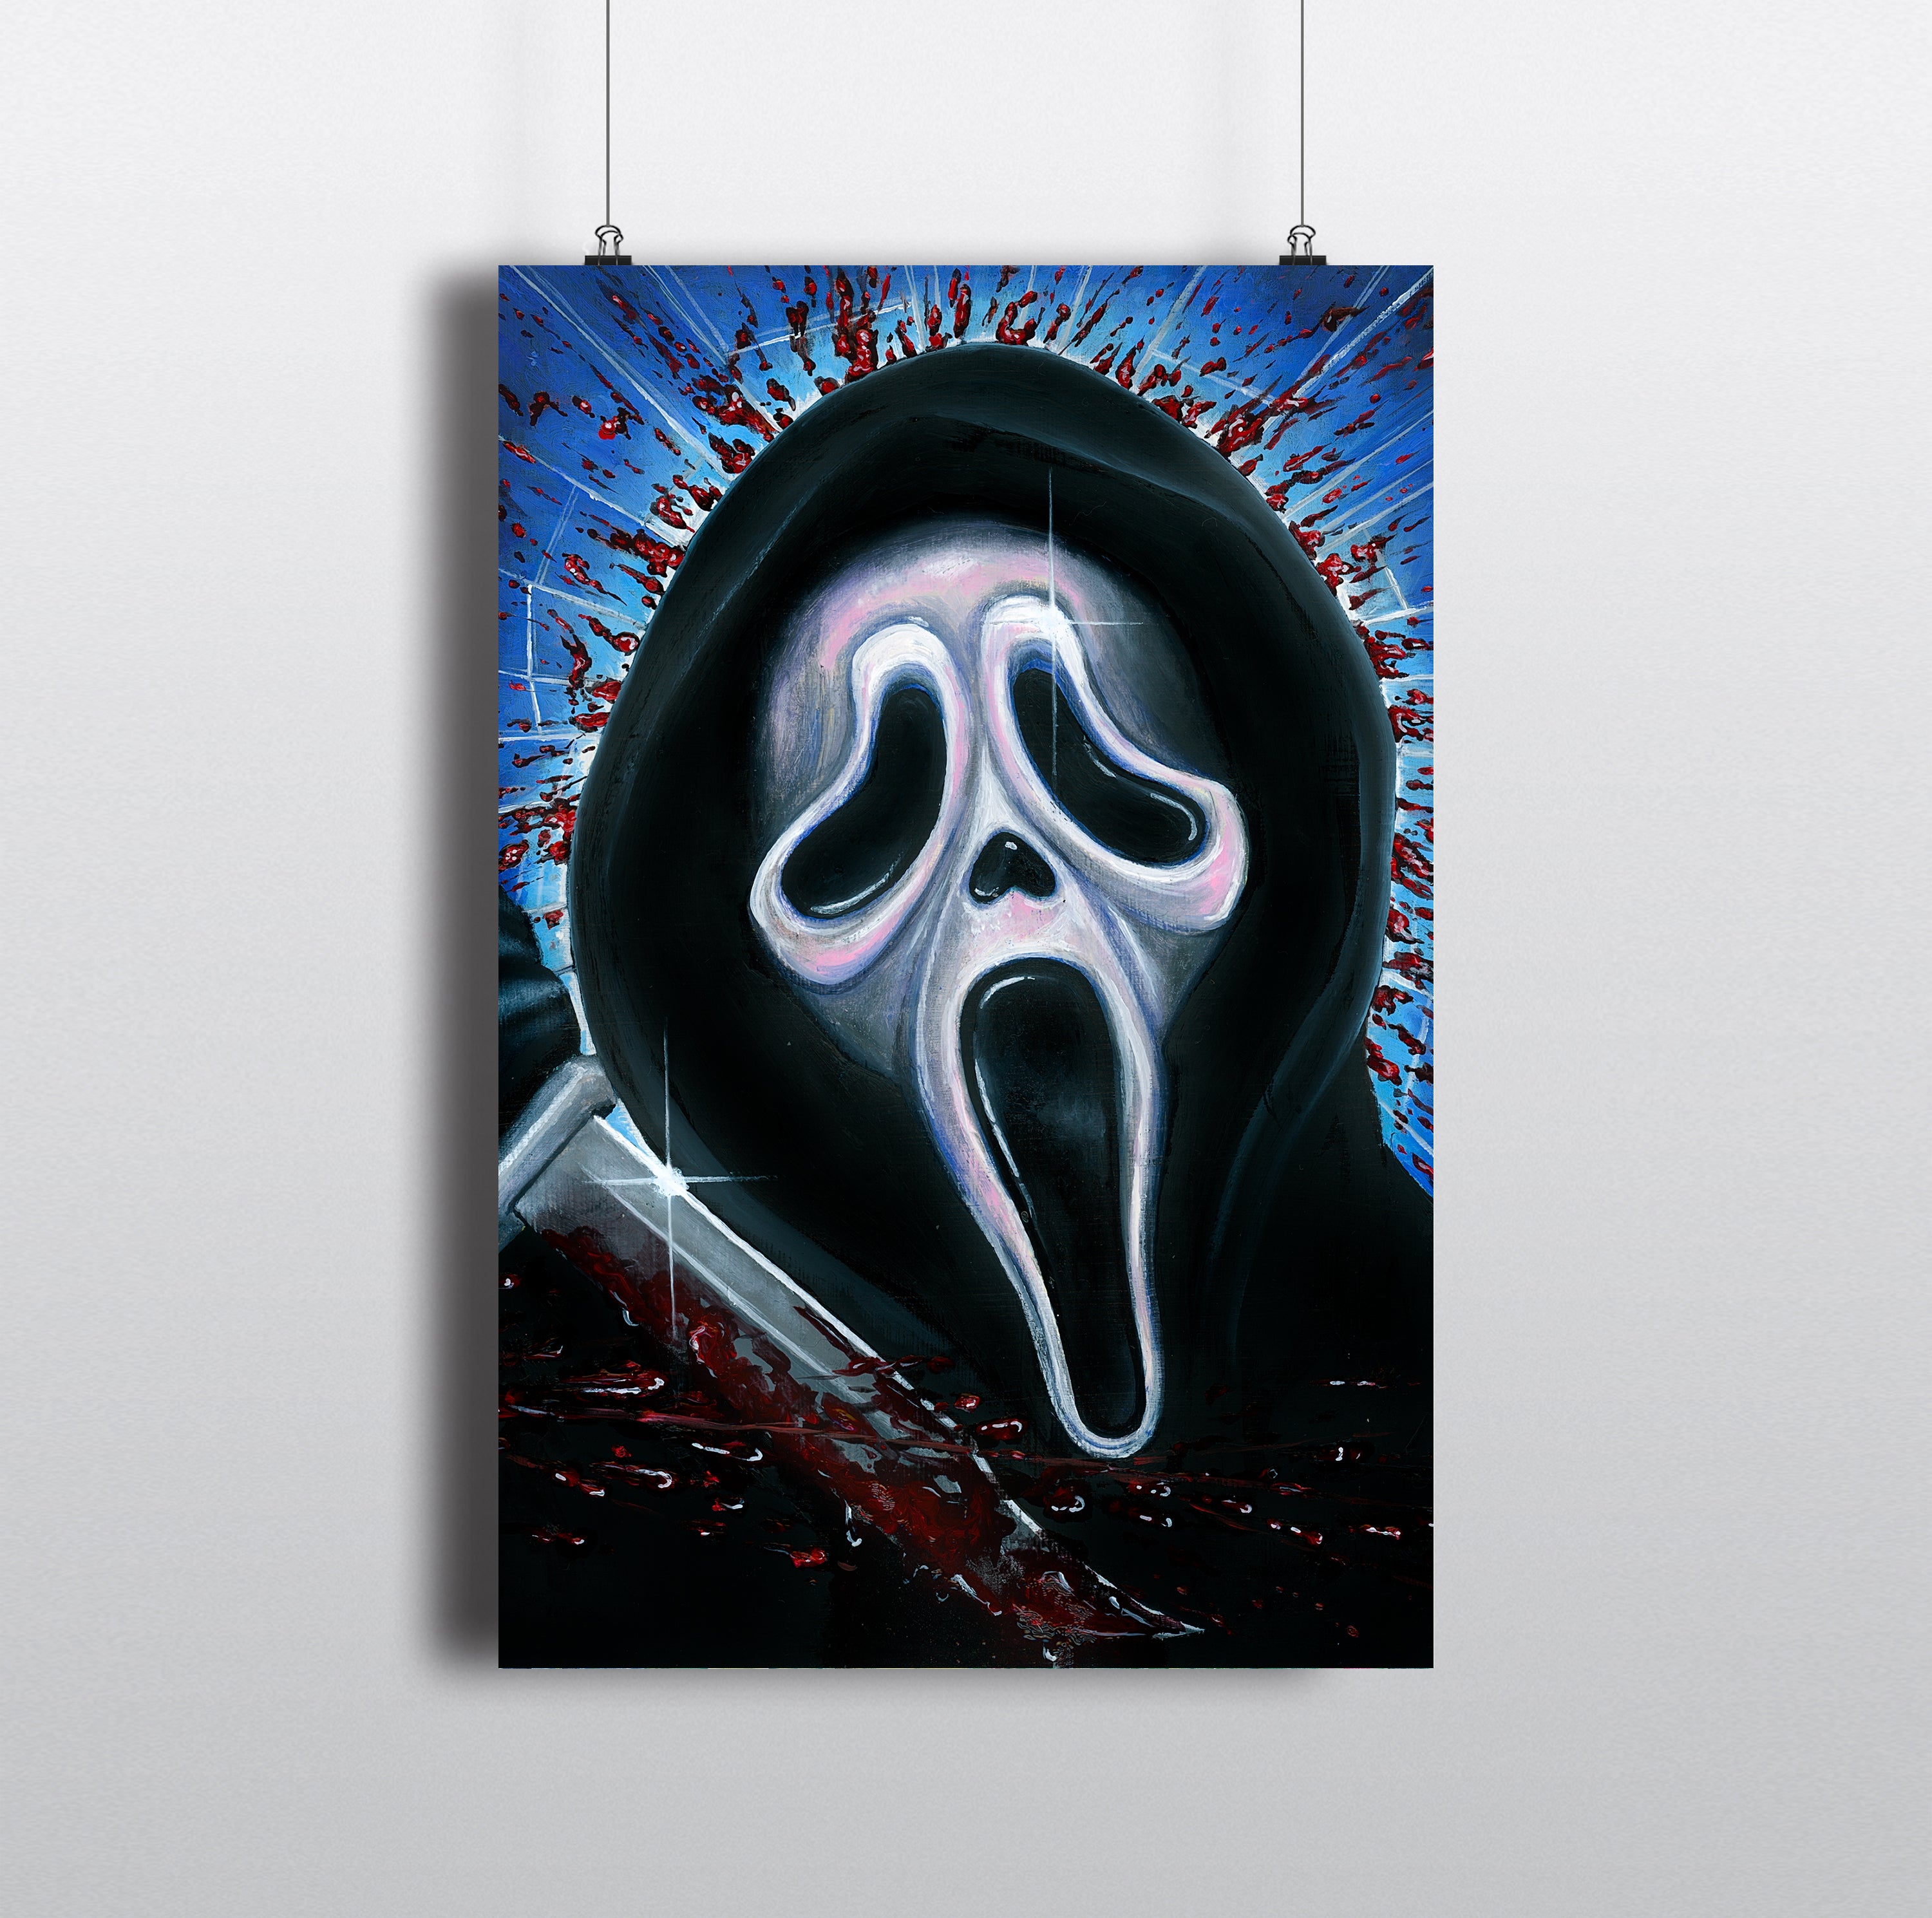 Ghostface Scream Tapestries for Sale